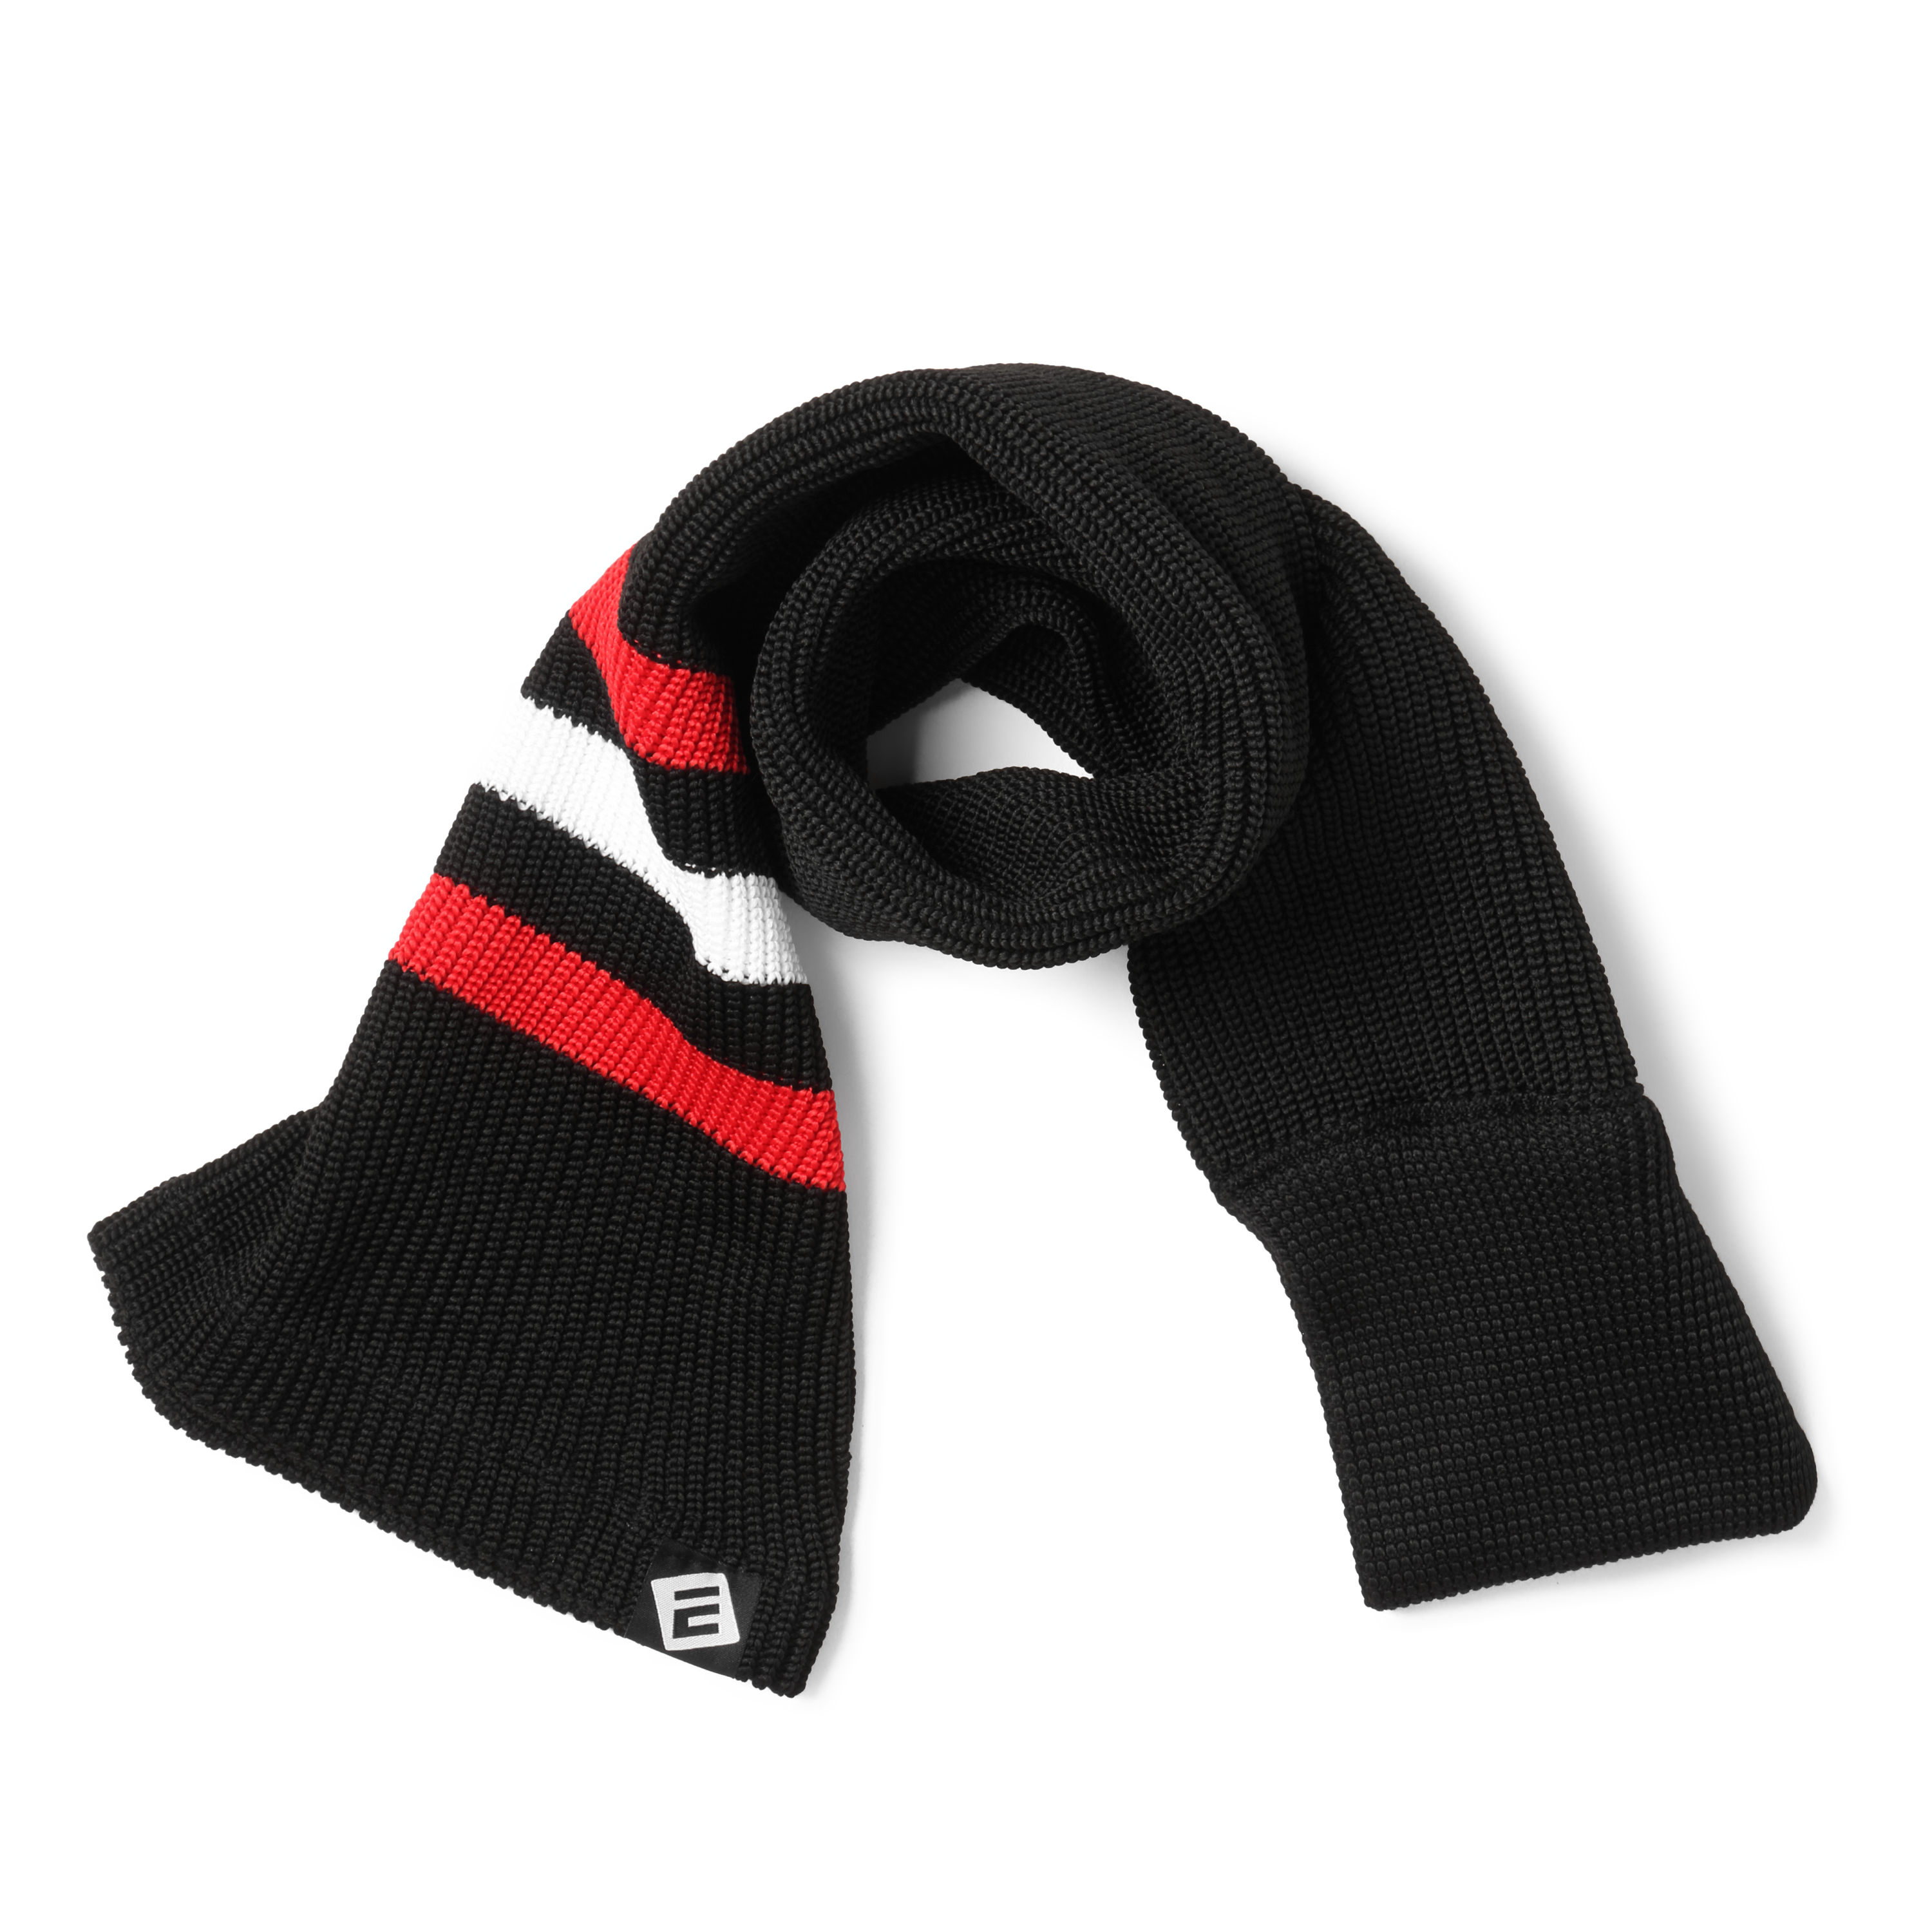 Sonderpreisinformationen EALER HAS200 Series Worry to Don\'t Striped Winter Design, to How About Unique Scarf Wear Cold-proof/Warm Have Knit Men\'s